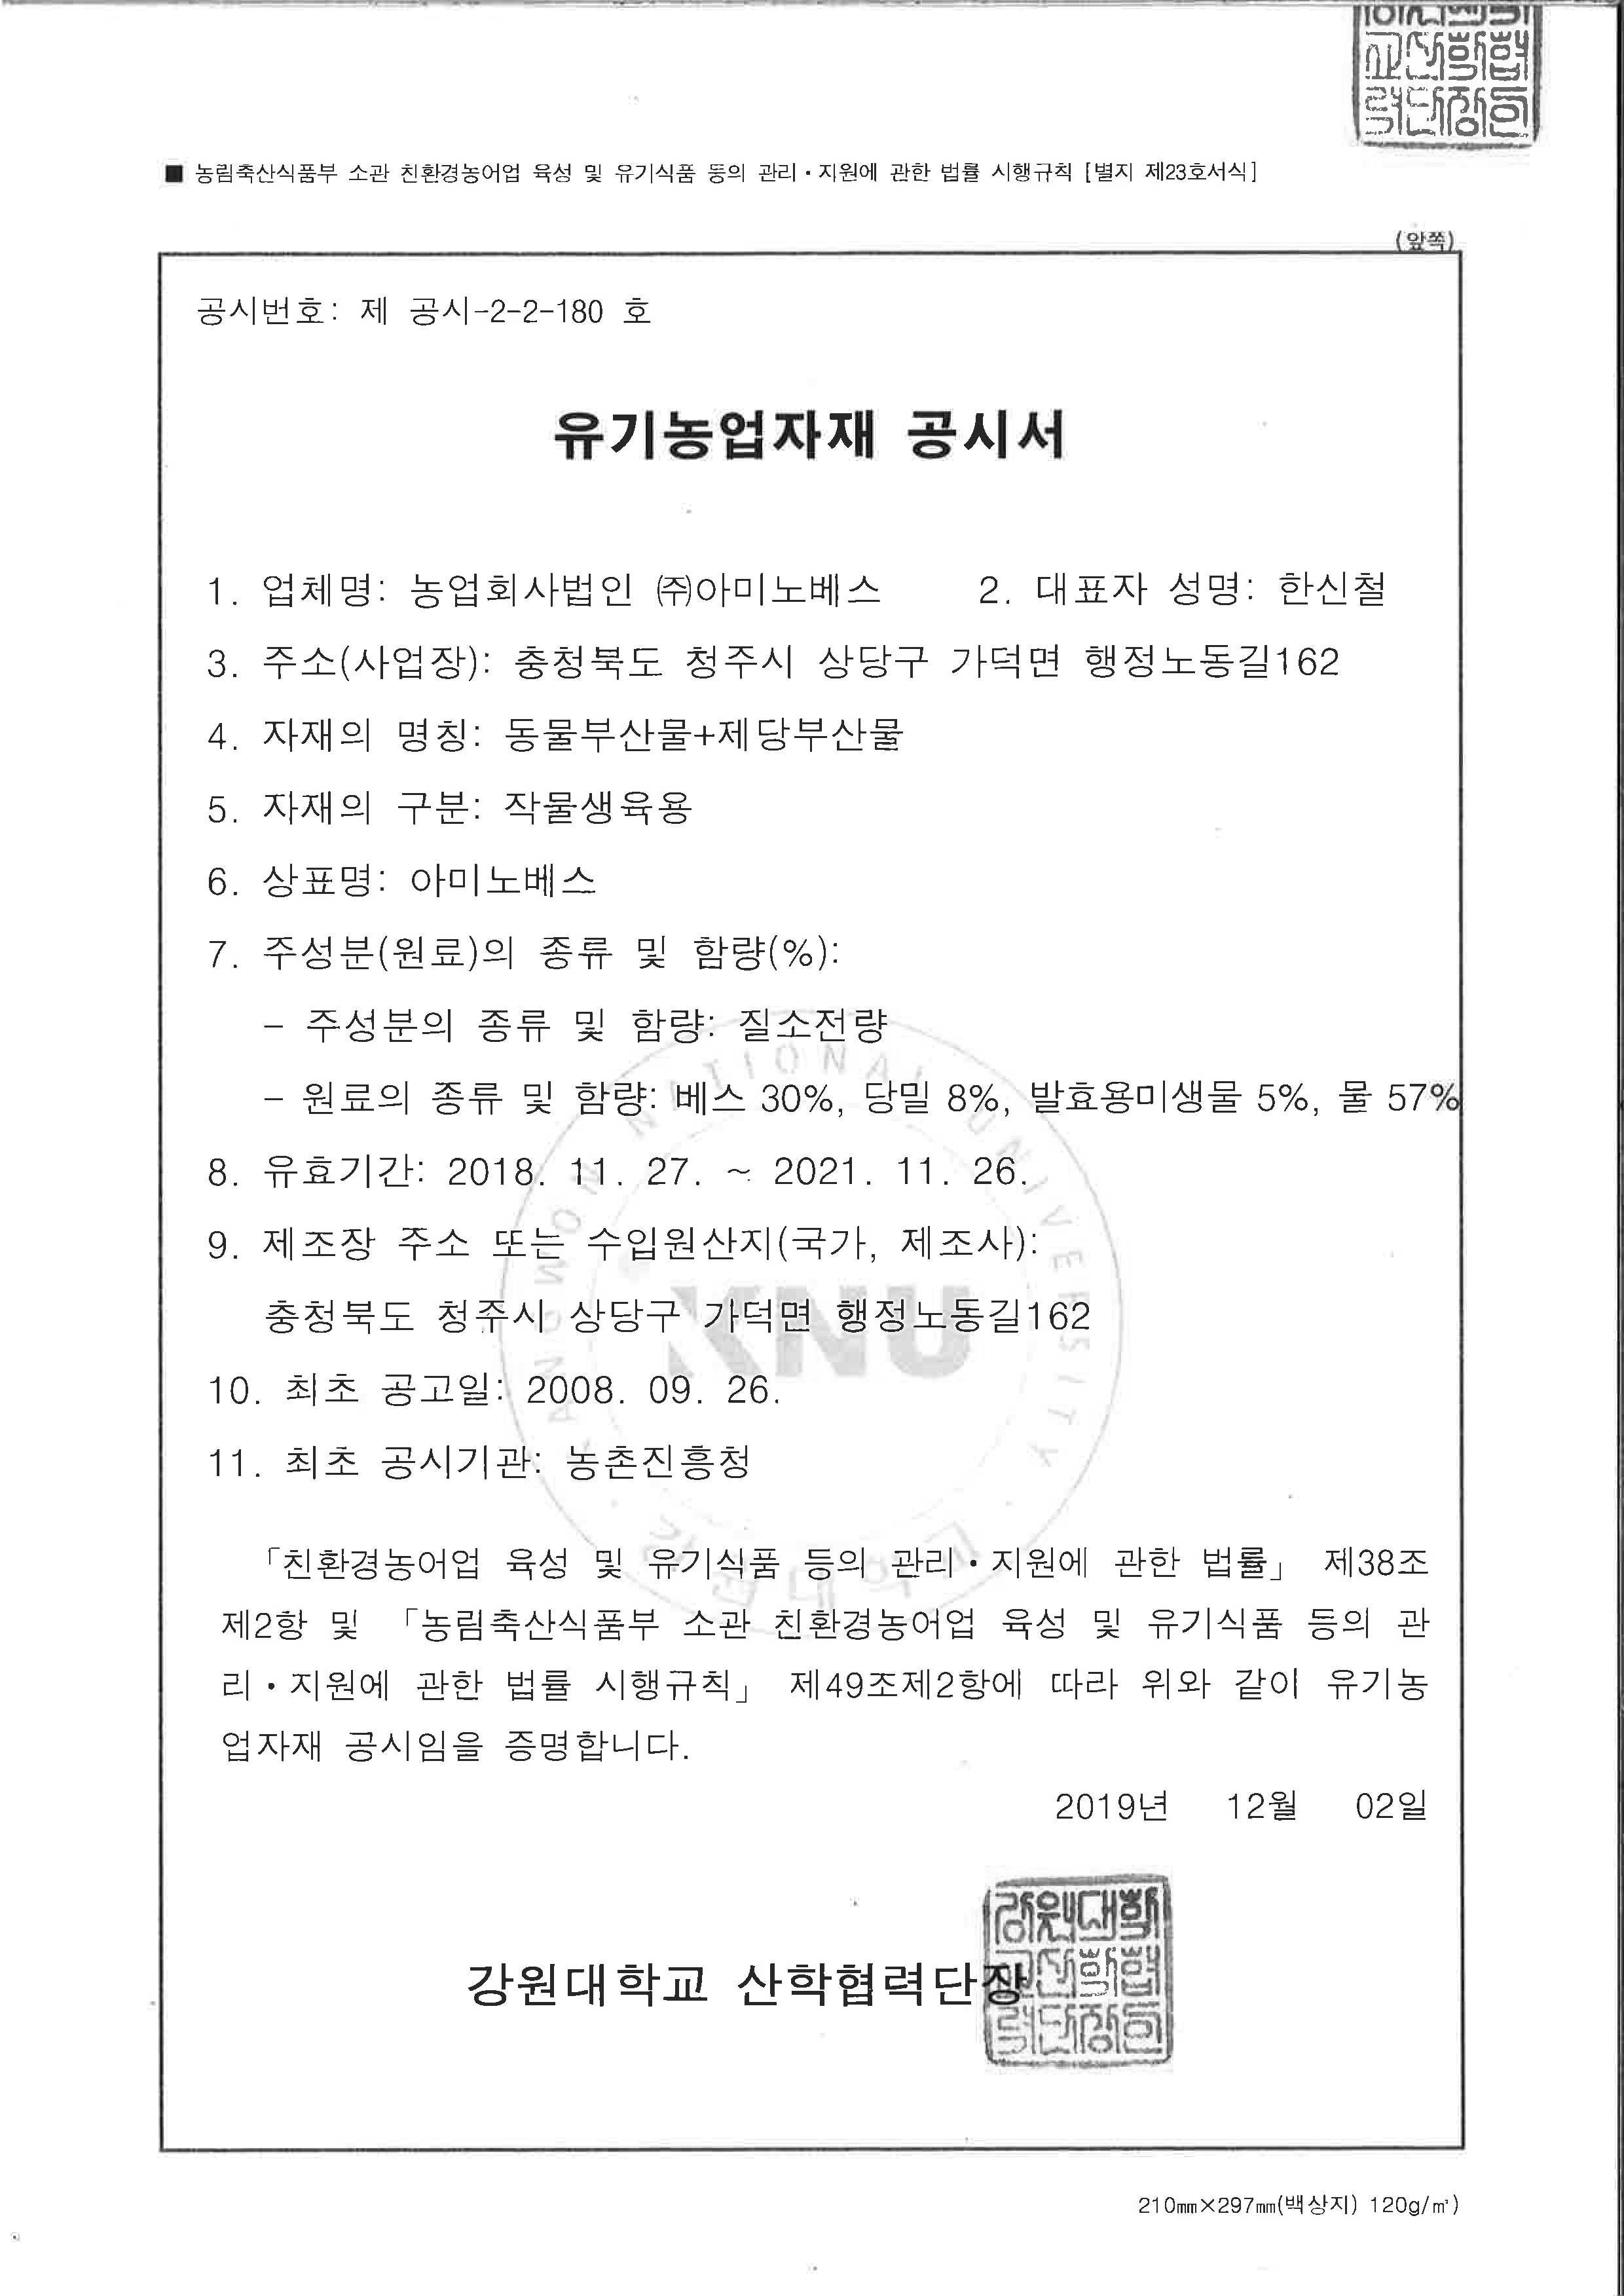 Organic Agricultural Materials Publication Statement [첨부 이미지1]